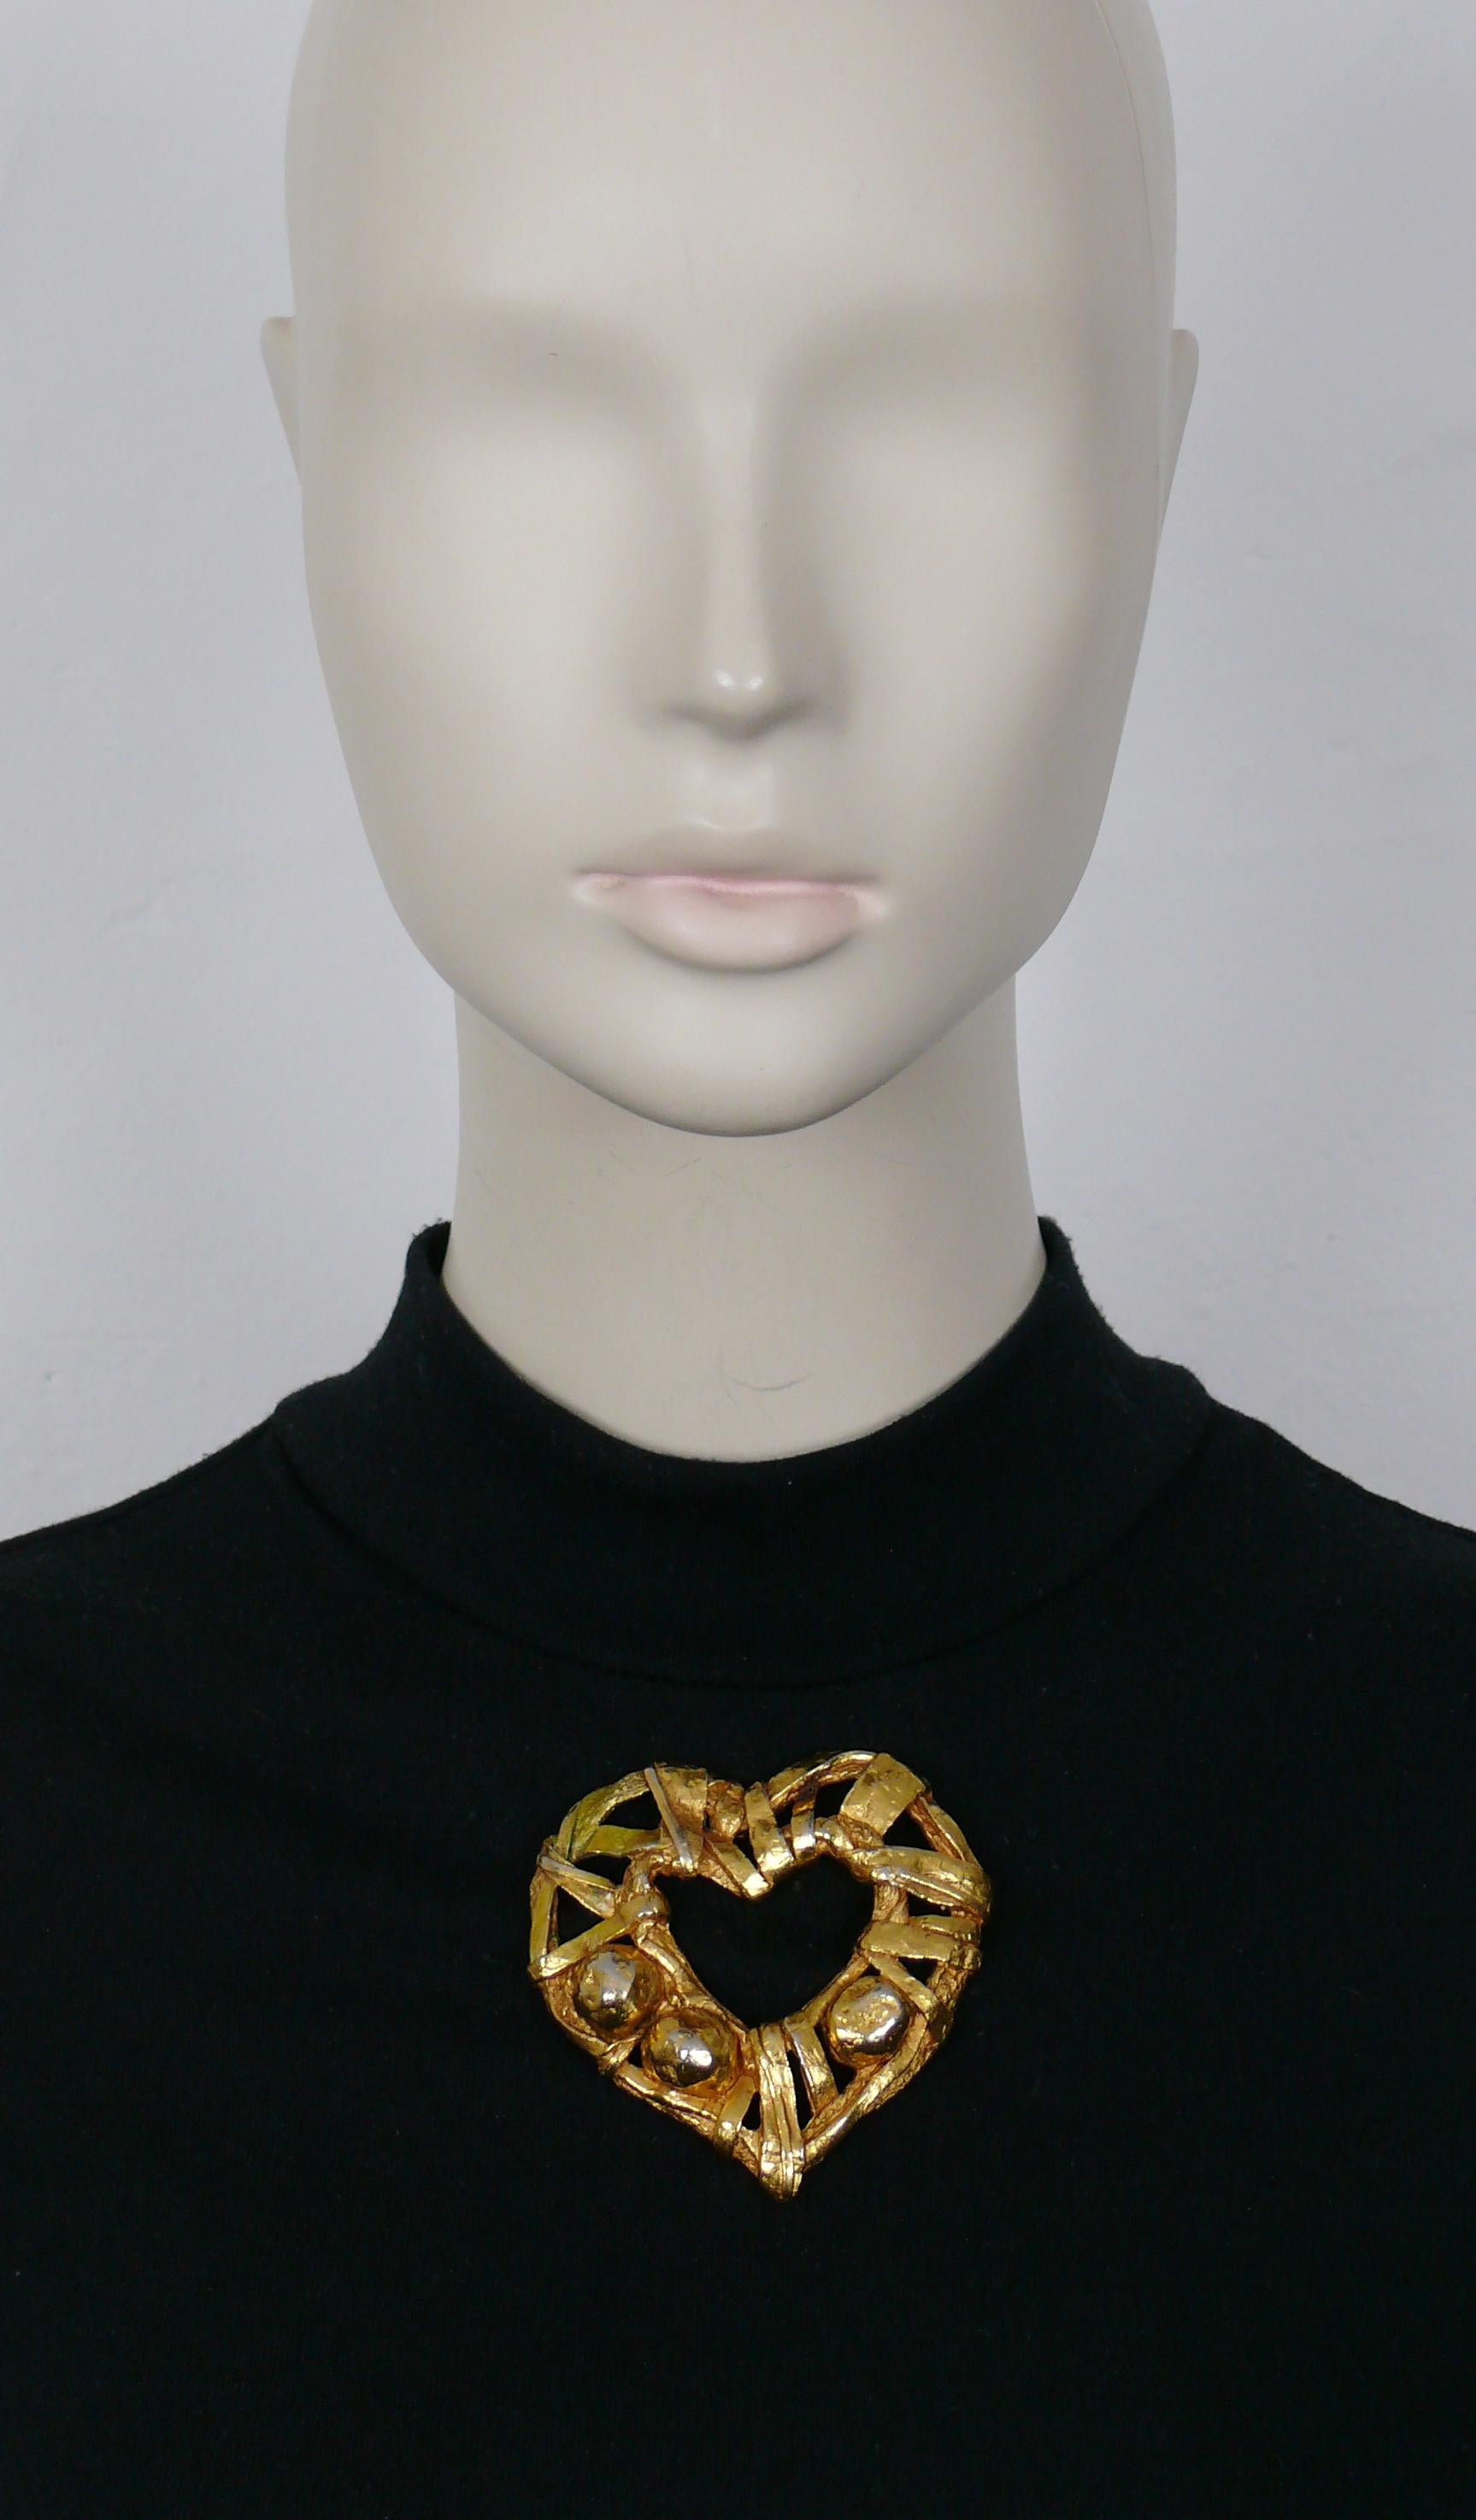 CHRISTIAN LACROIX vintage textured gold tone heart brooch.

Marked CHRISTIAN LACROIX CL Made in France.

Indicative measurements : max. height approx. 7 cm (2.76 inches) / max. width approx. 7.1 cm (2.80 inches).

Material : Gold tone metal